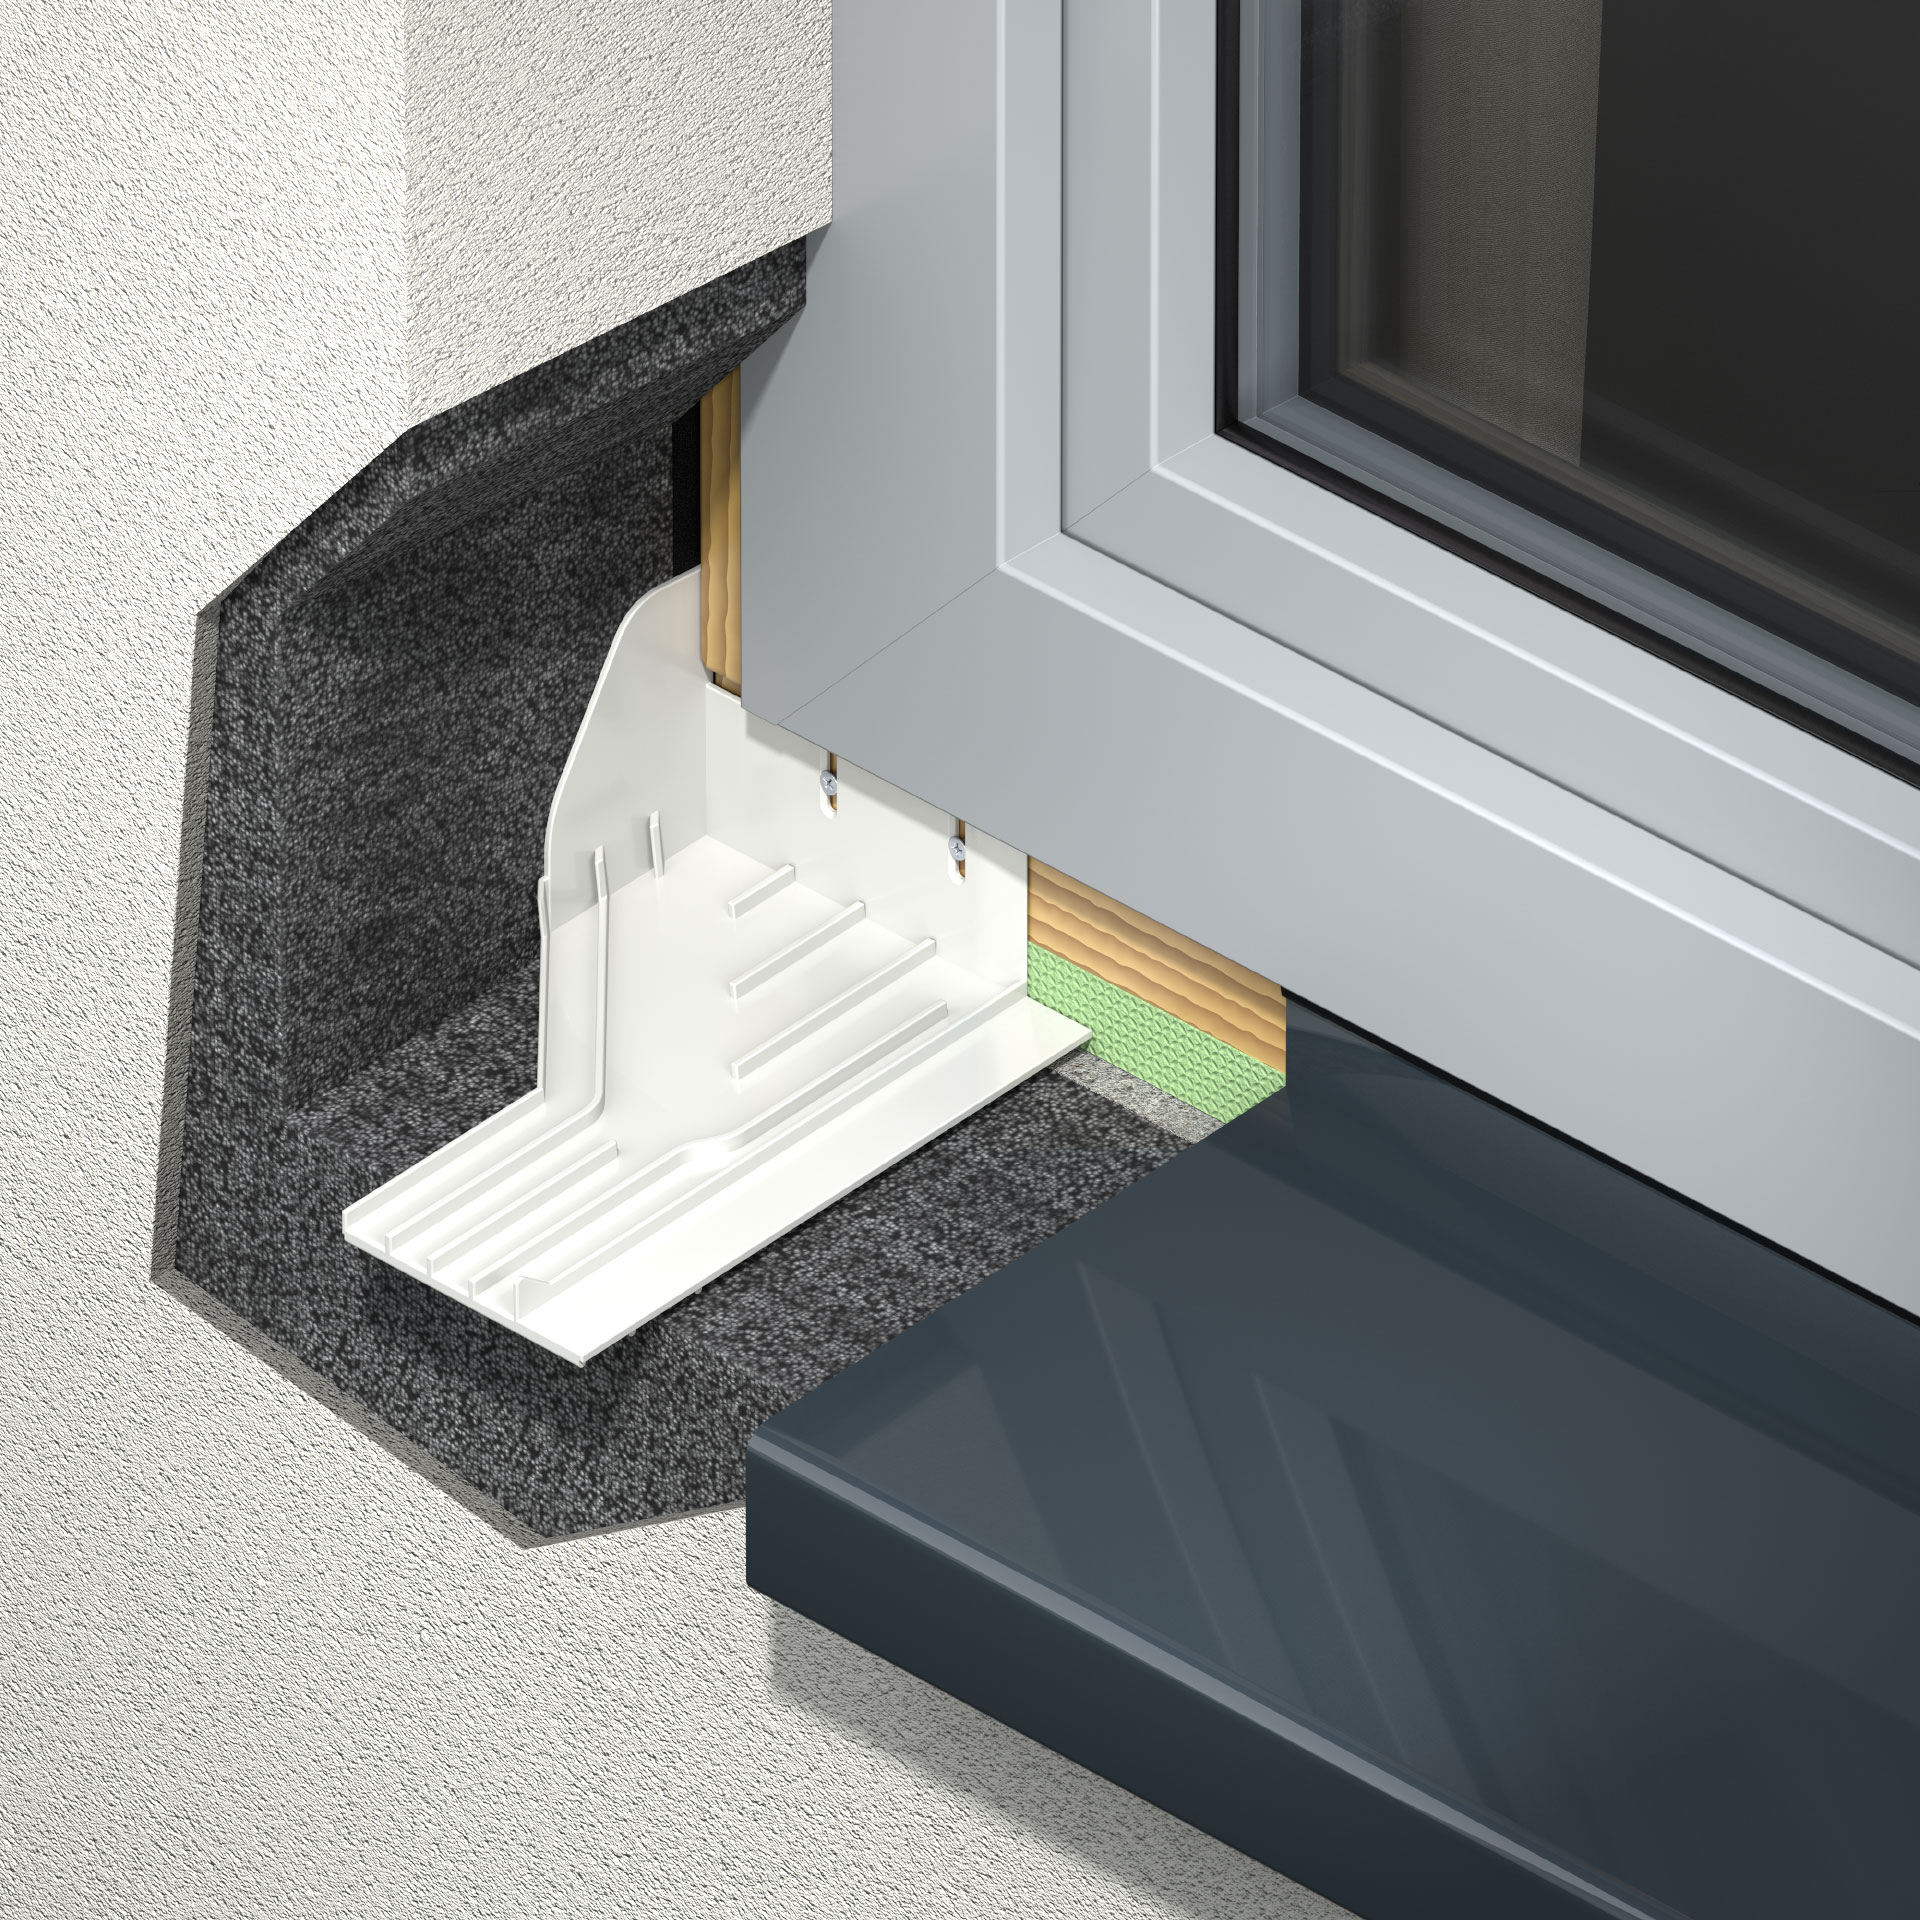 Connections to windows & rolling shutters for plaster & ETIC – water that gets into the structure via the structural connection (window, rolling shutter guide rail, window sill) is drained to the outside using a controlled system.